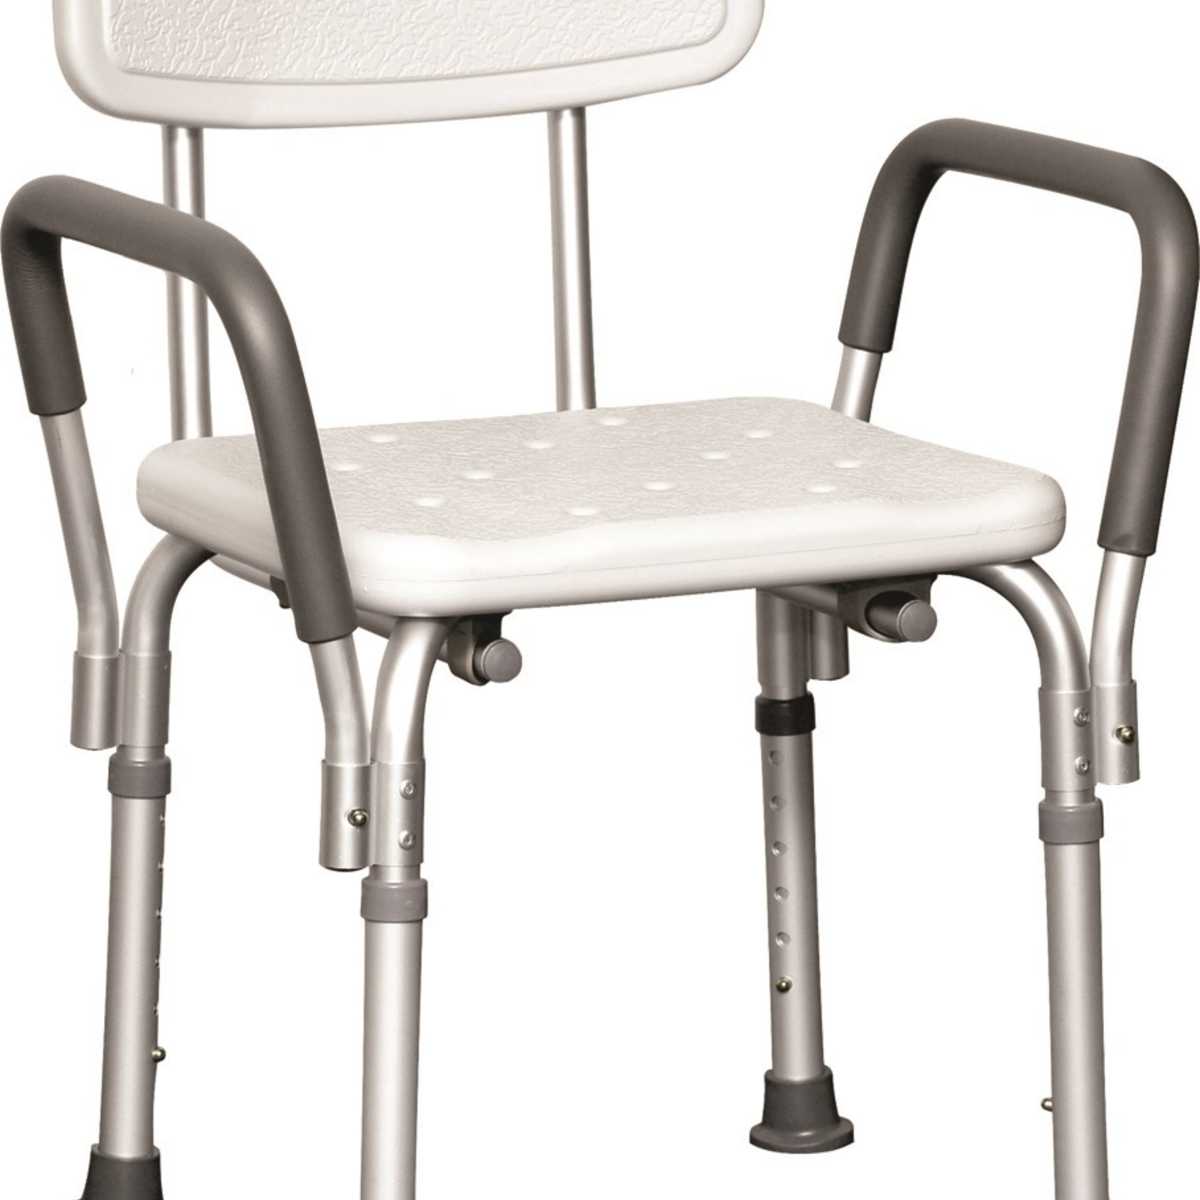 Shower Chair With Arms